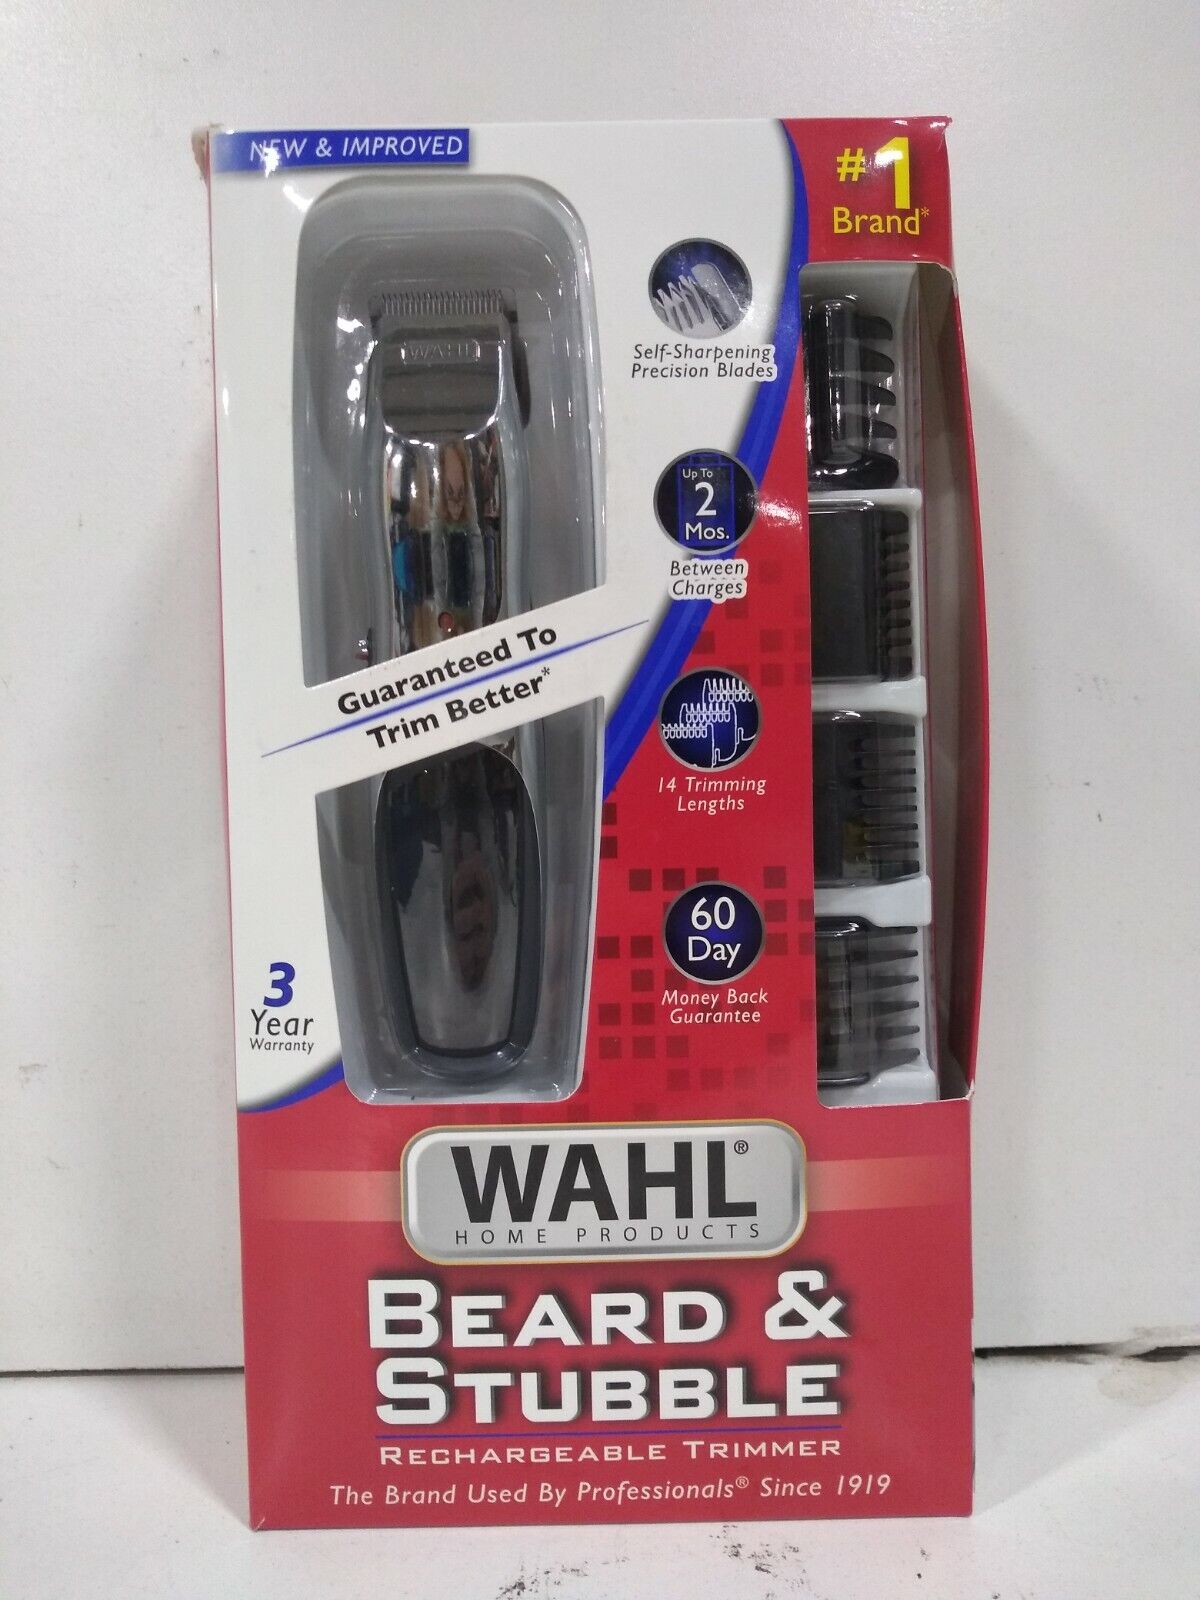 Wahl Beard & Stubble Rechargeable Trimmer 9916-4301